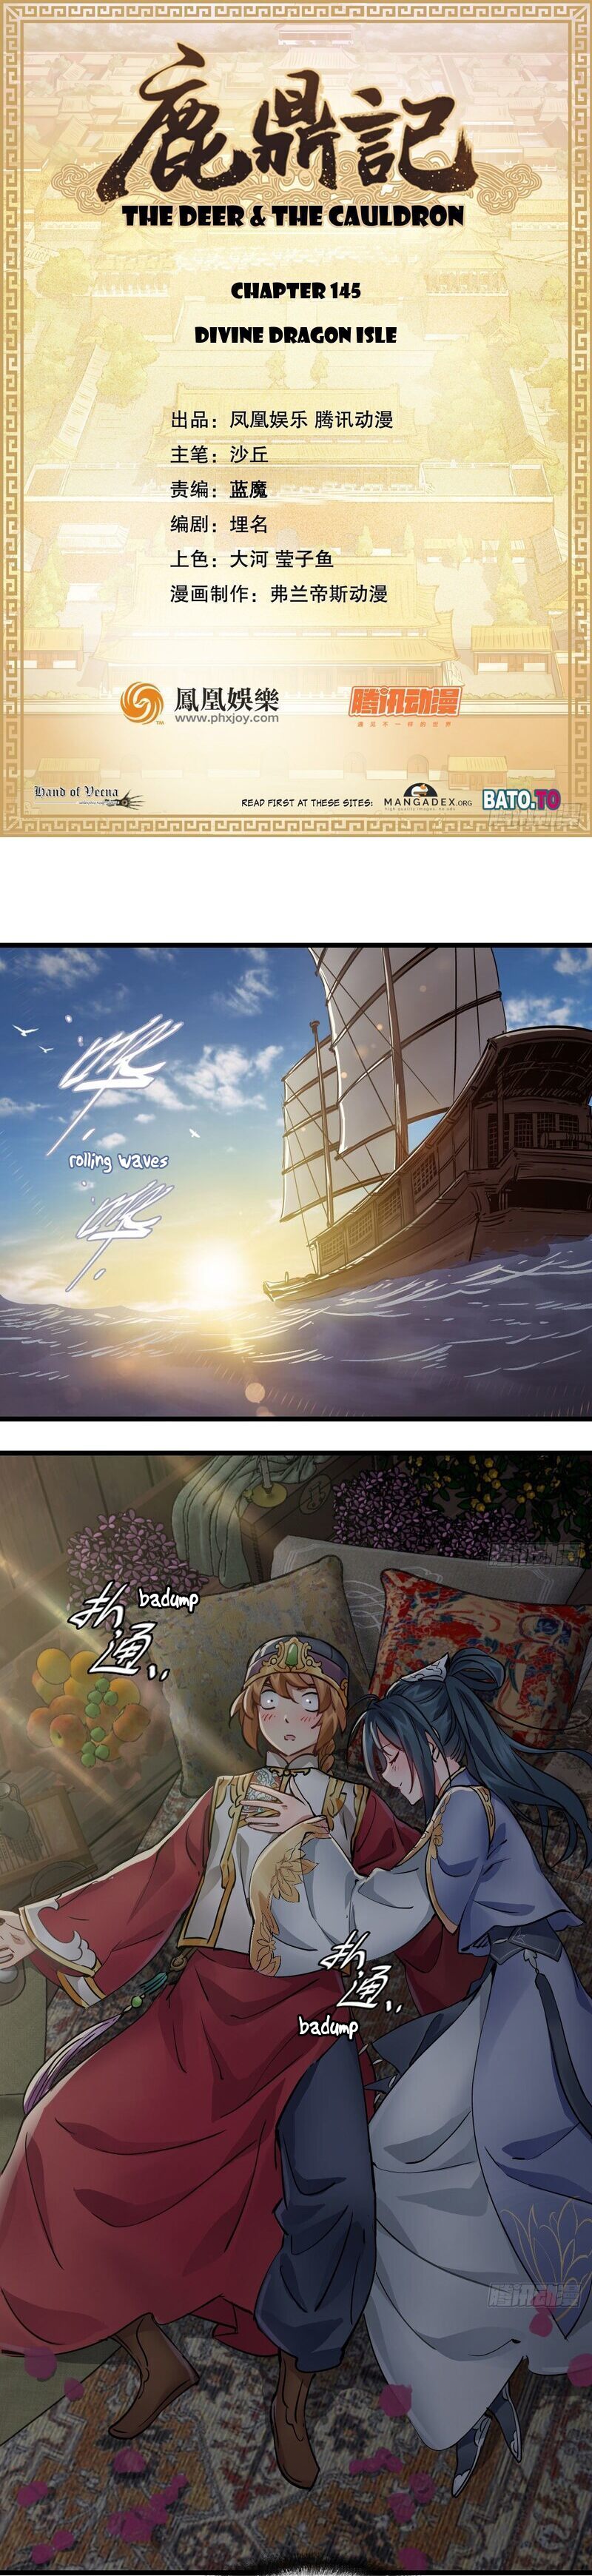 The Deer And The Cauldron Chapter 145: Divine Dragon Isle - Picture 1